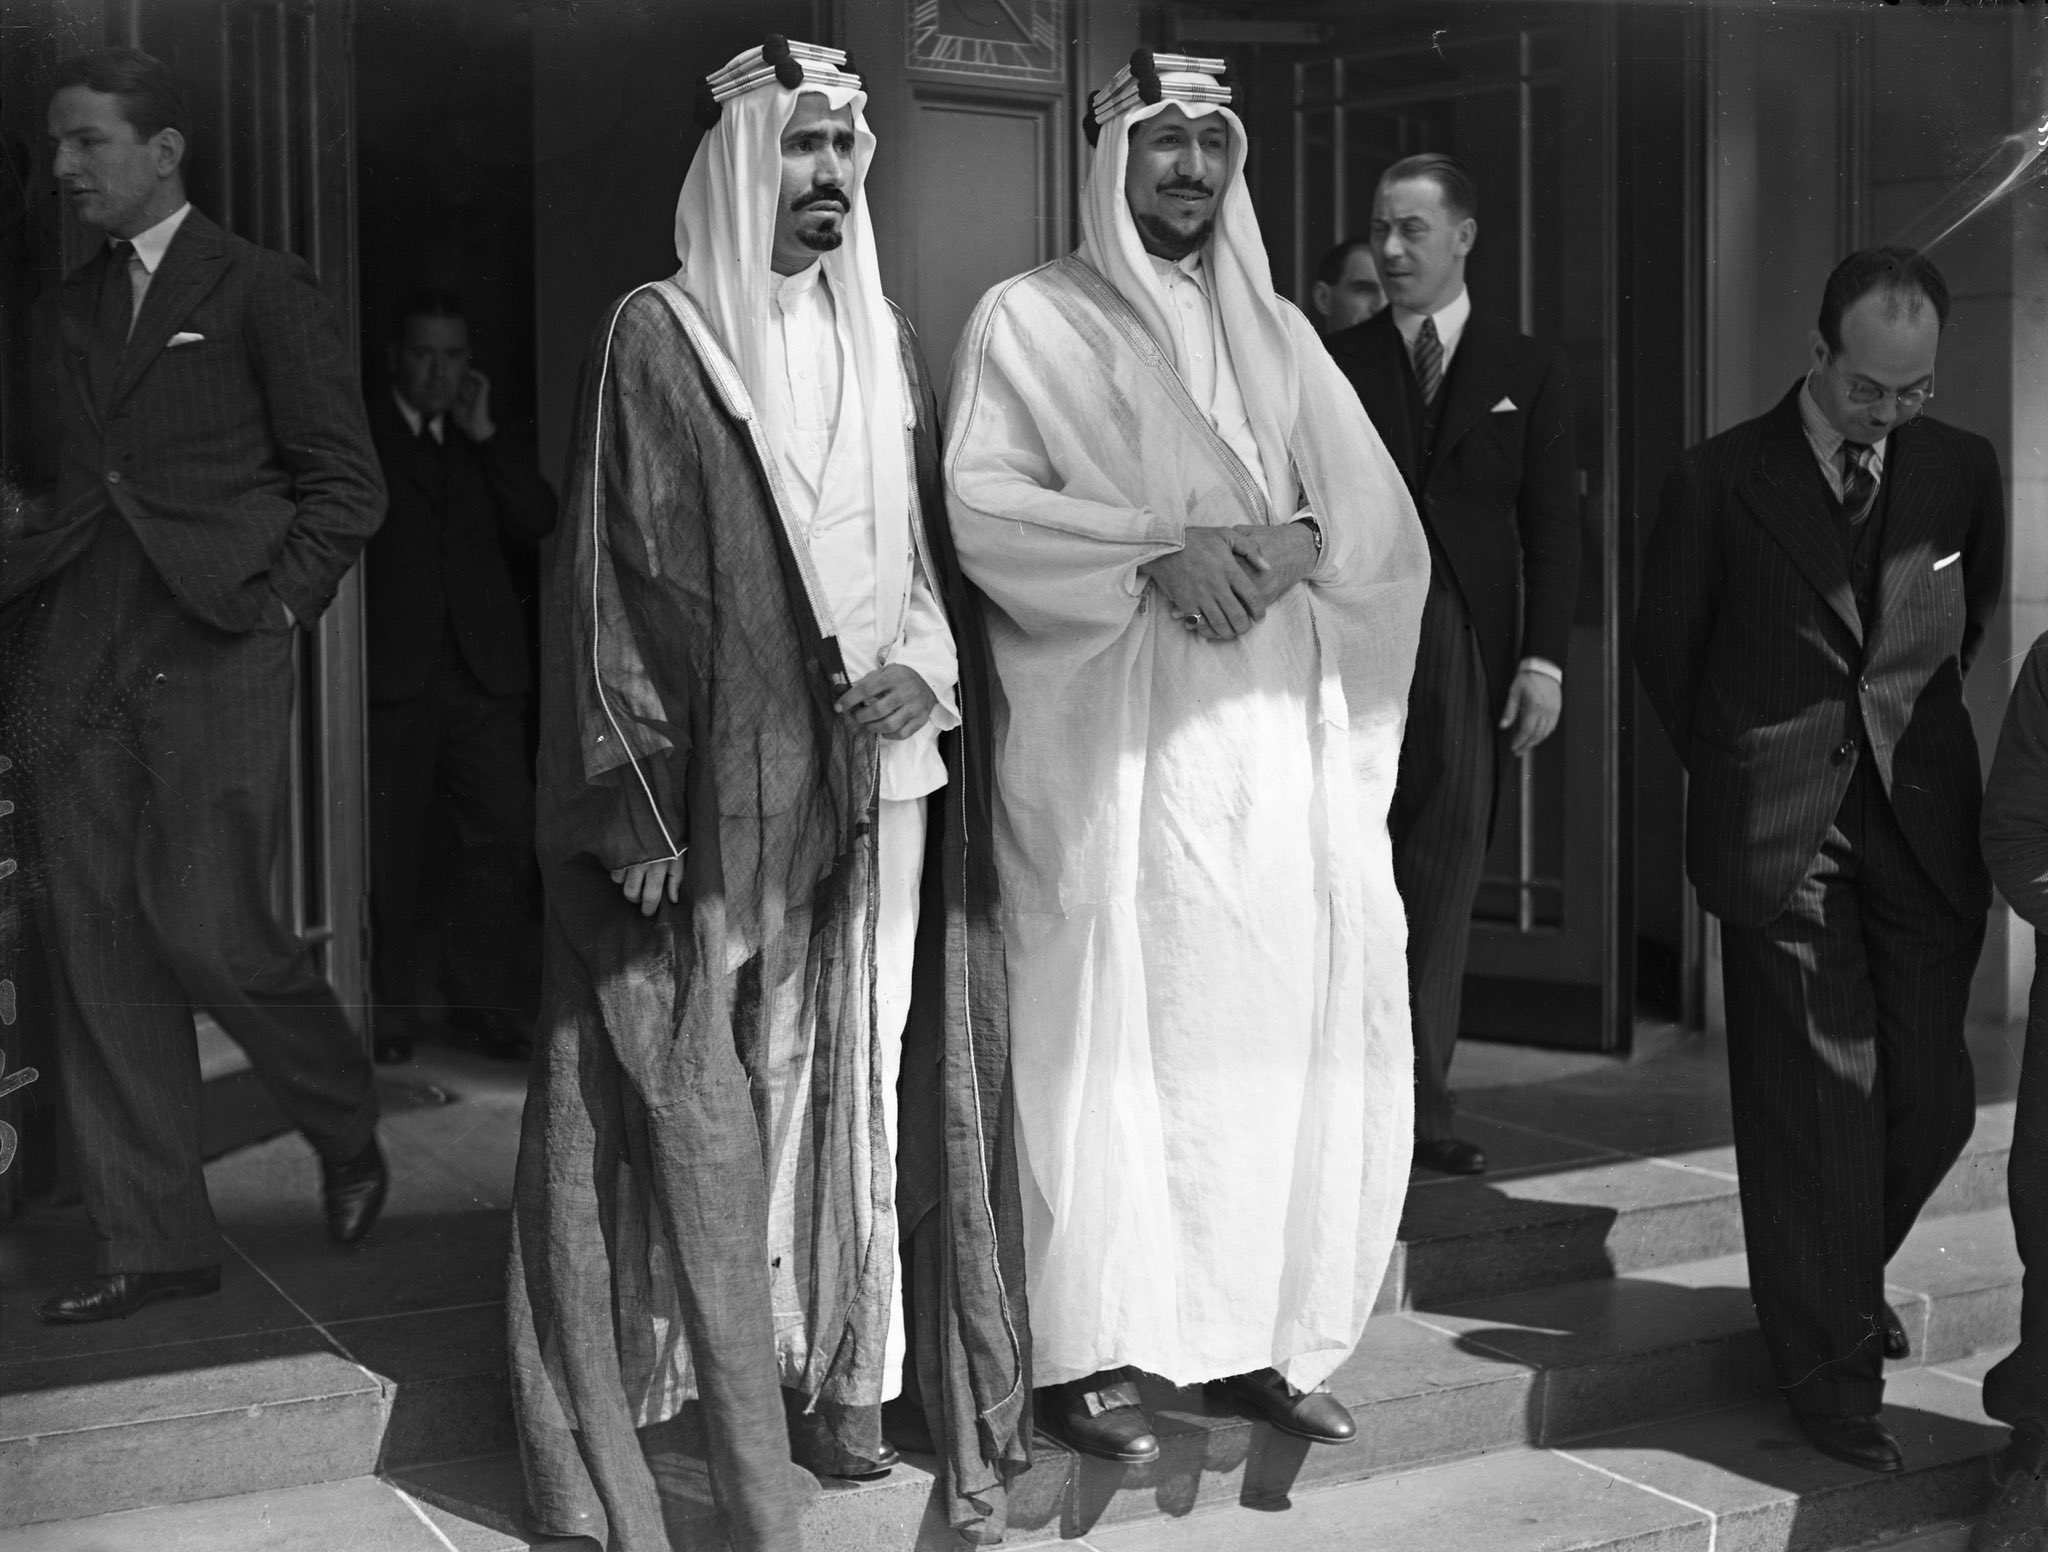 Crown Prince Saud and his brother Prince Mohammed, Hafez Wahba and Zarkali arrive at Victoria Station to attend the coronation of King George VI - 7/5/1937